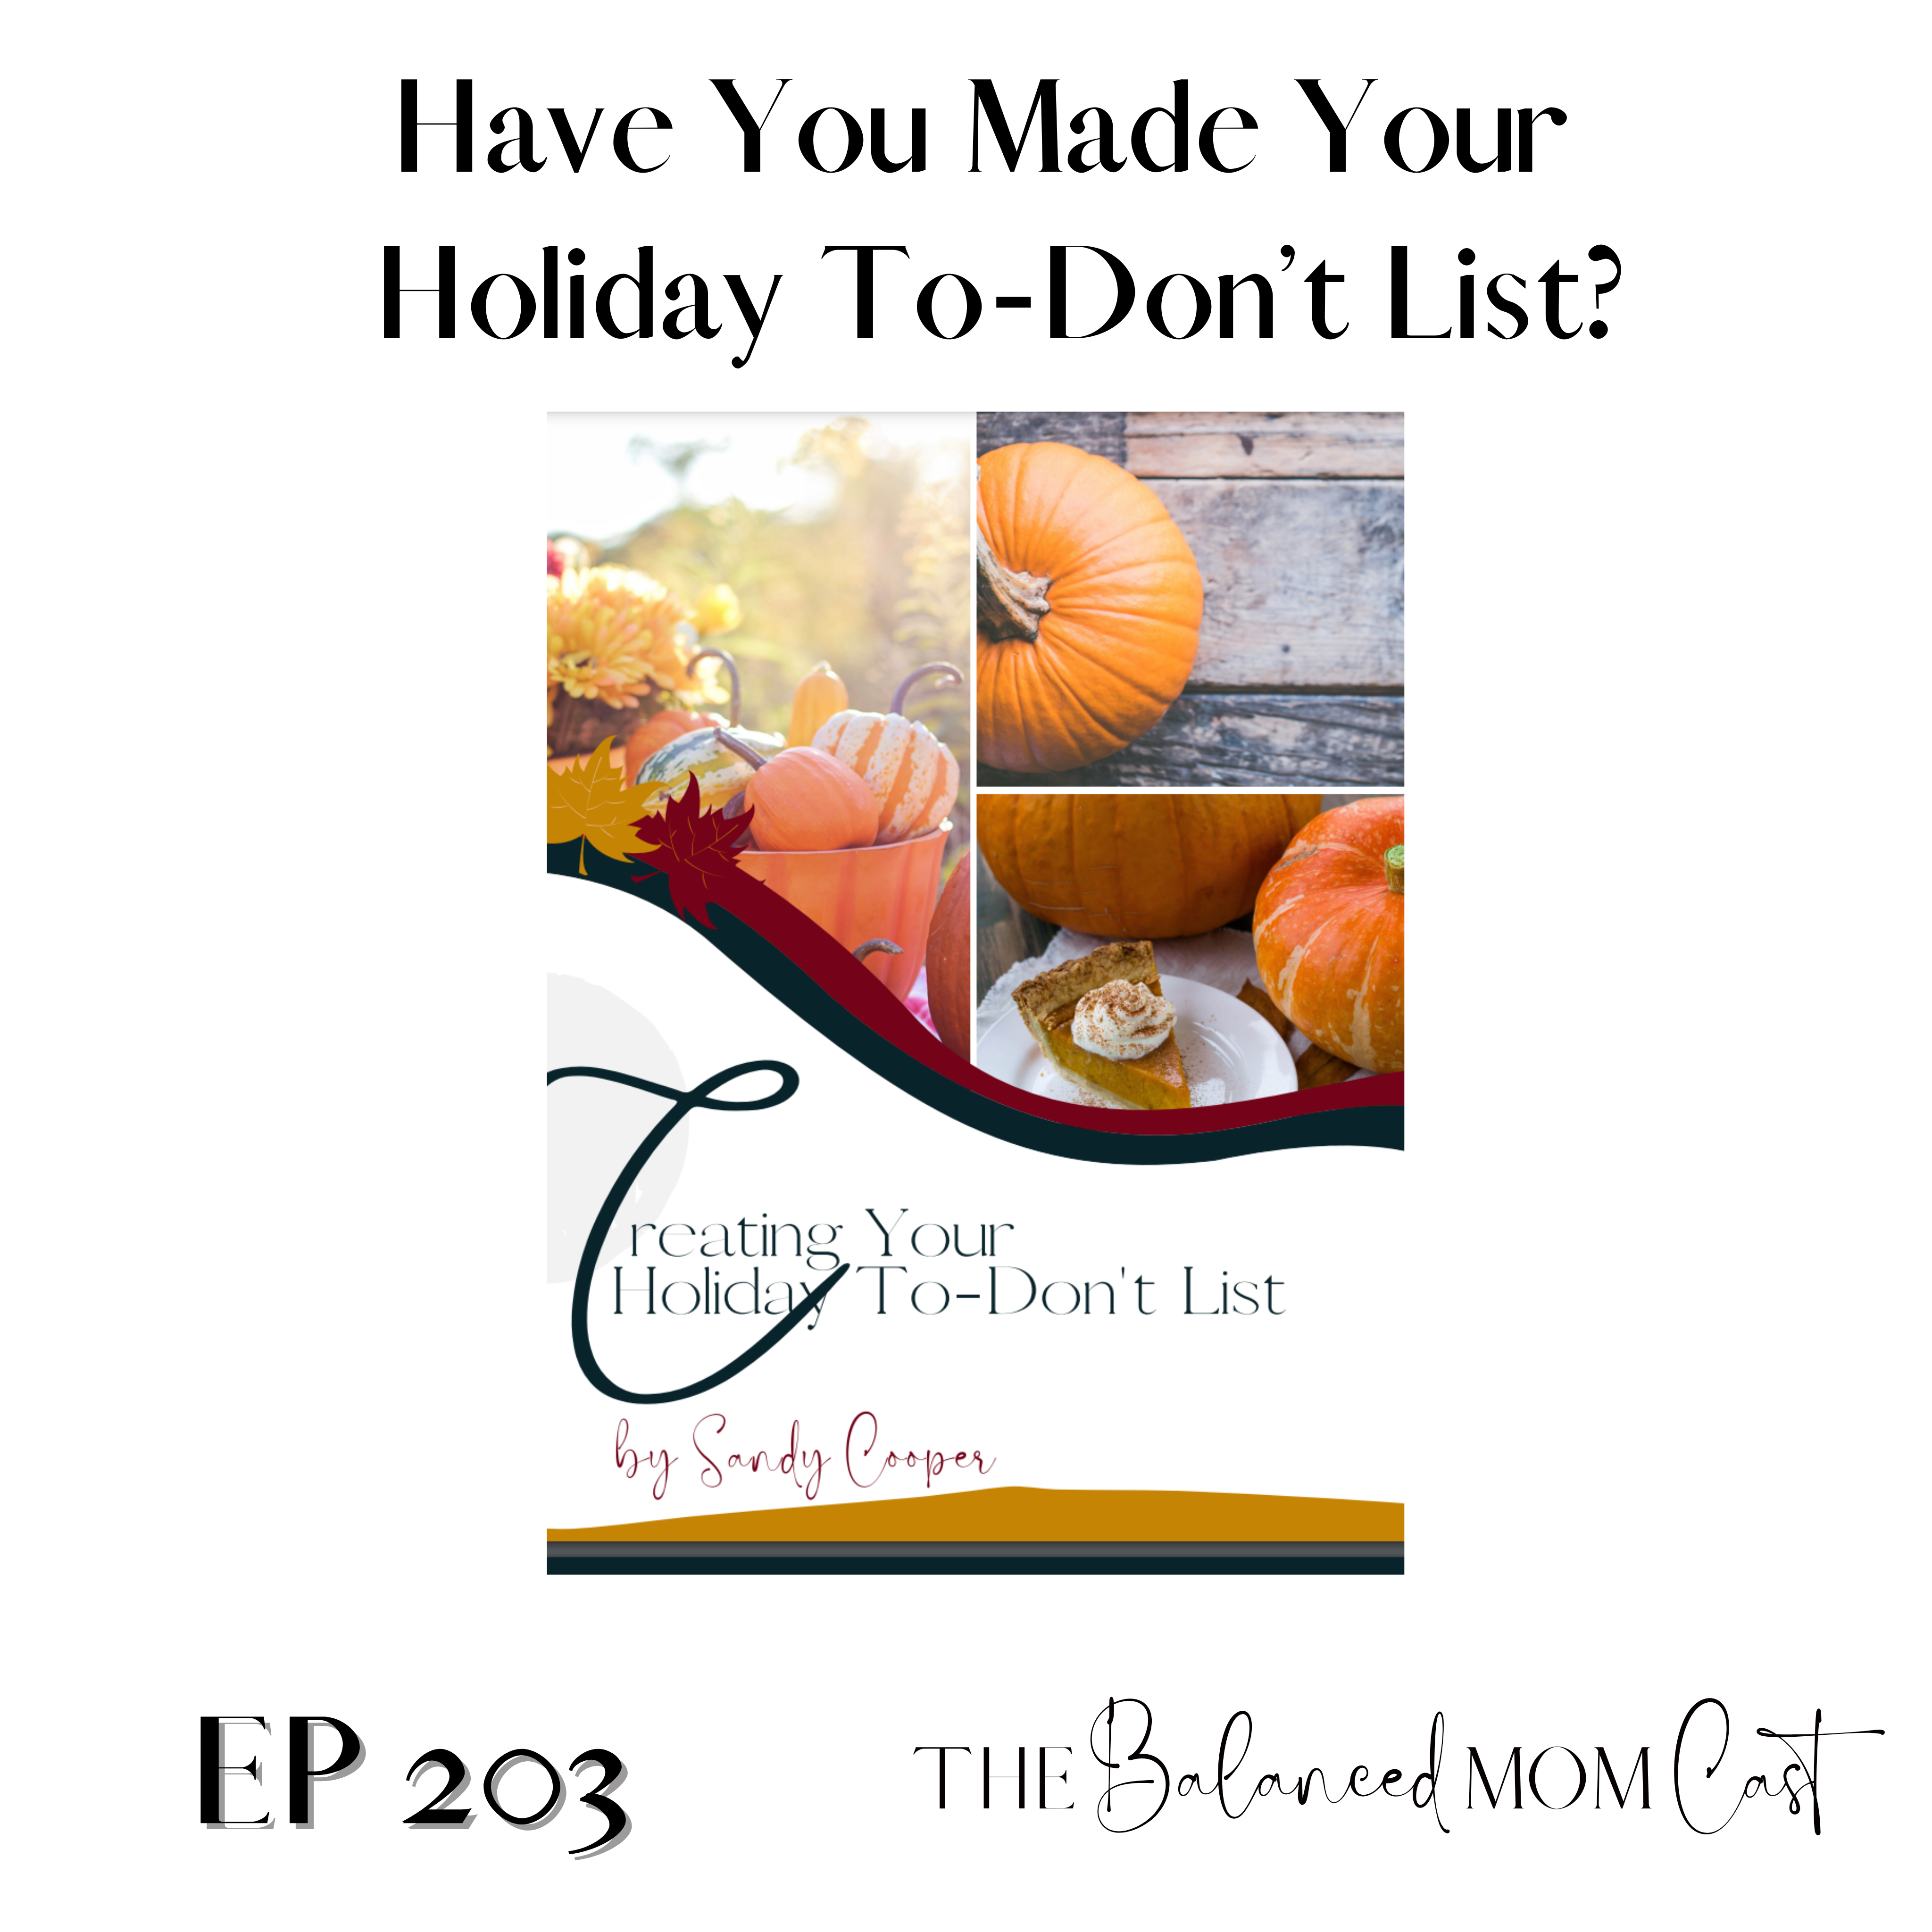 Ep 203: Have You Made Your Holiday To-Don’t List?